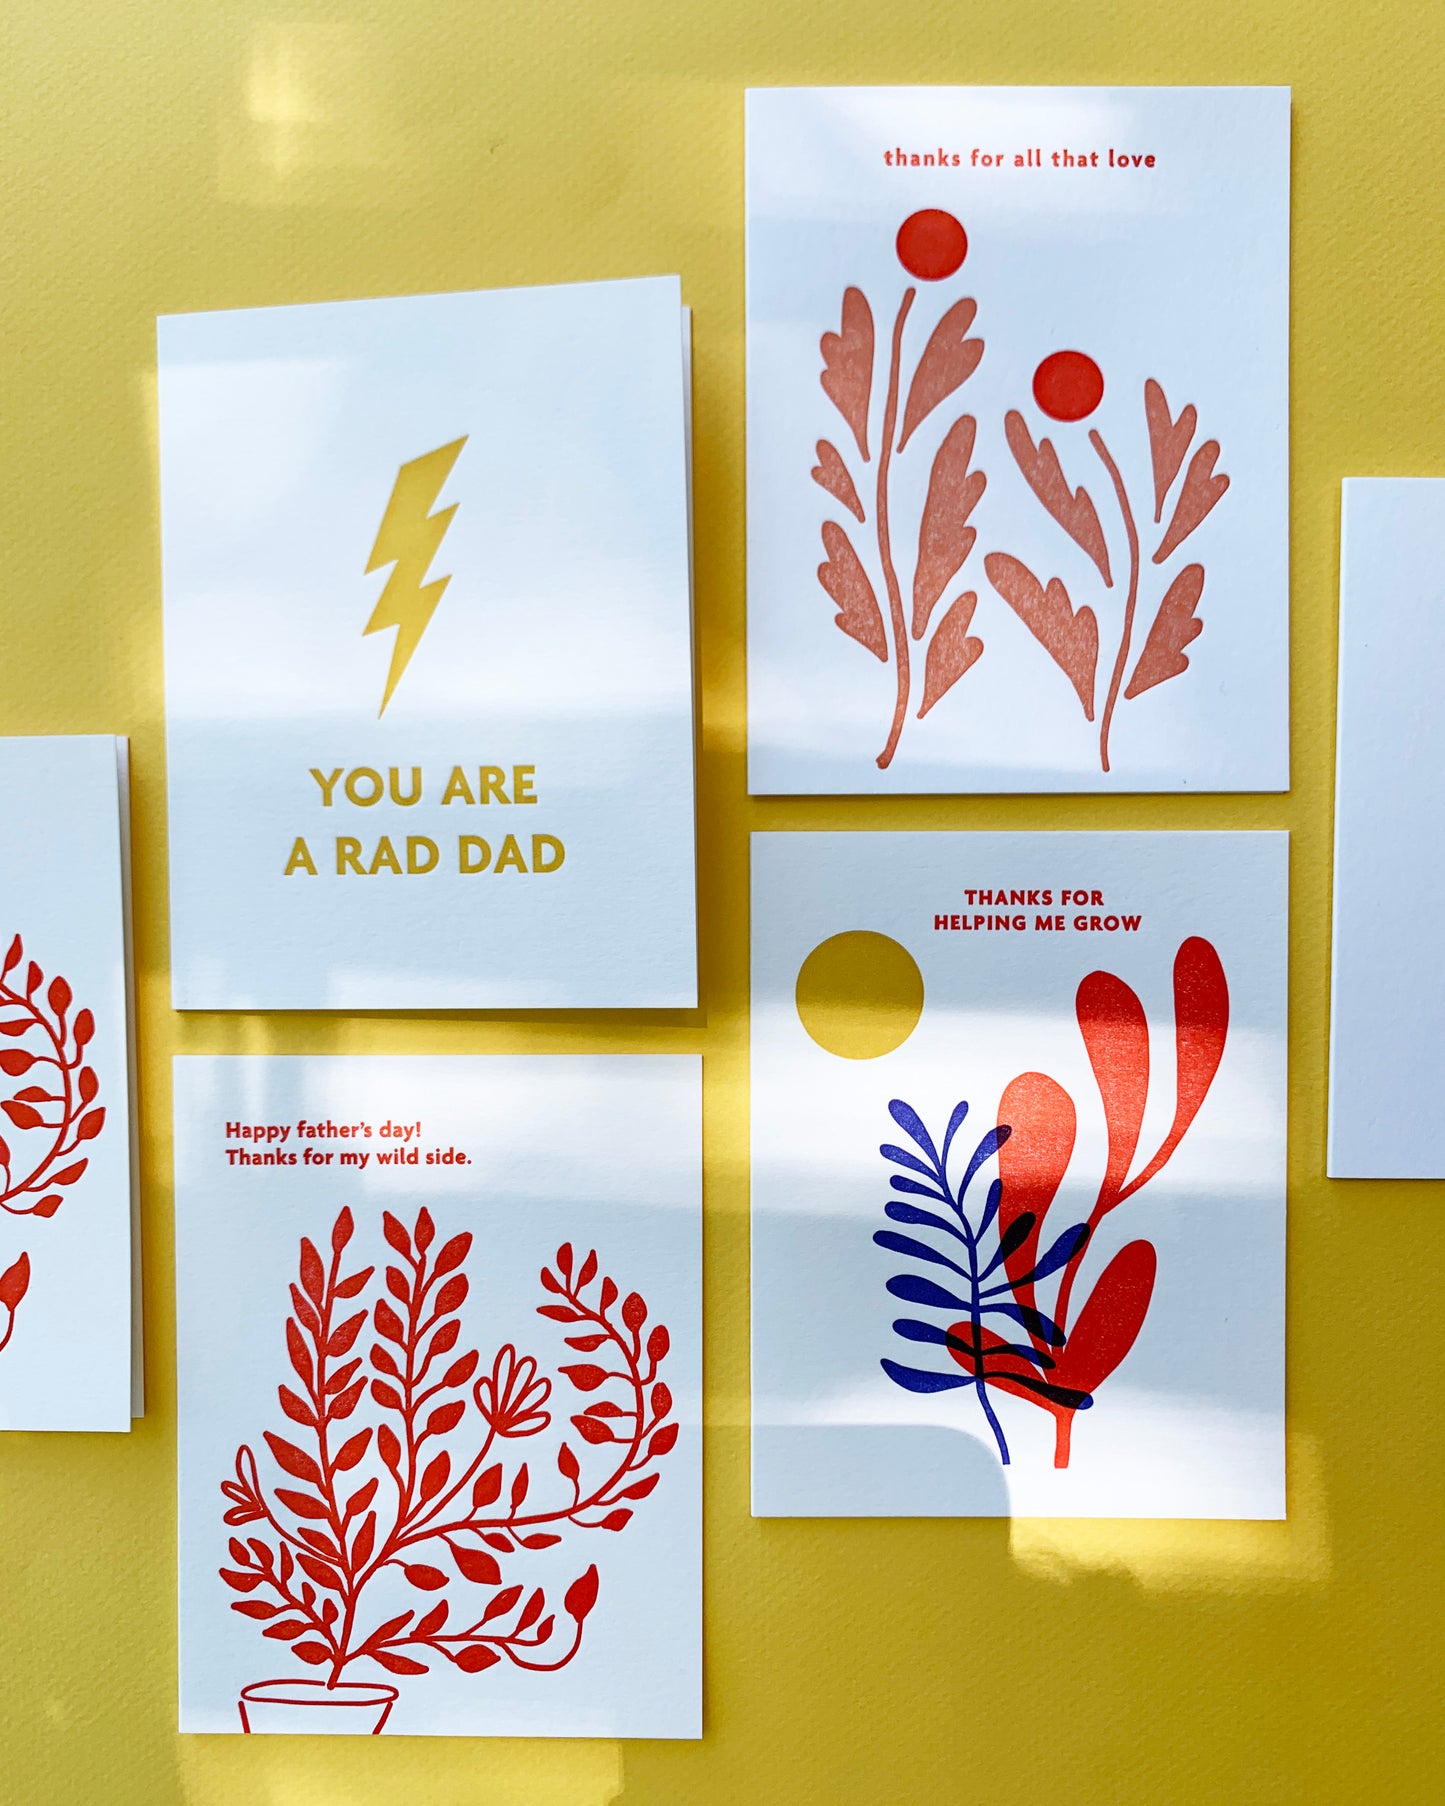 Father's Day/Wild Side Card #023